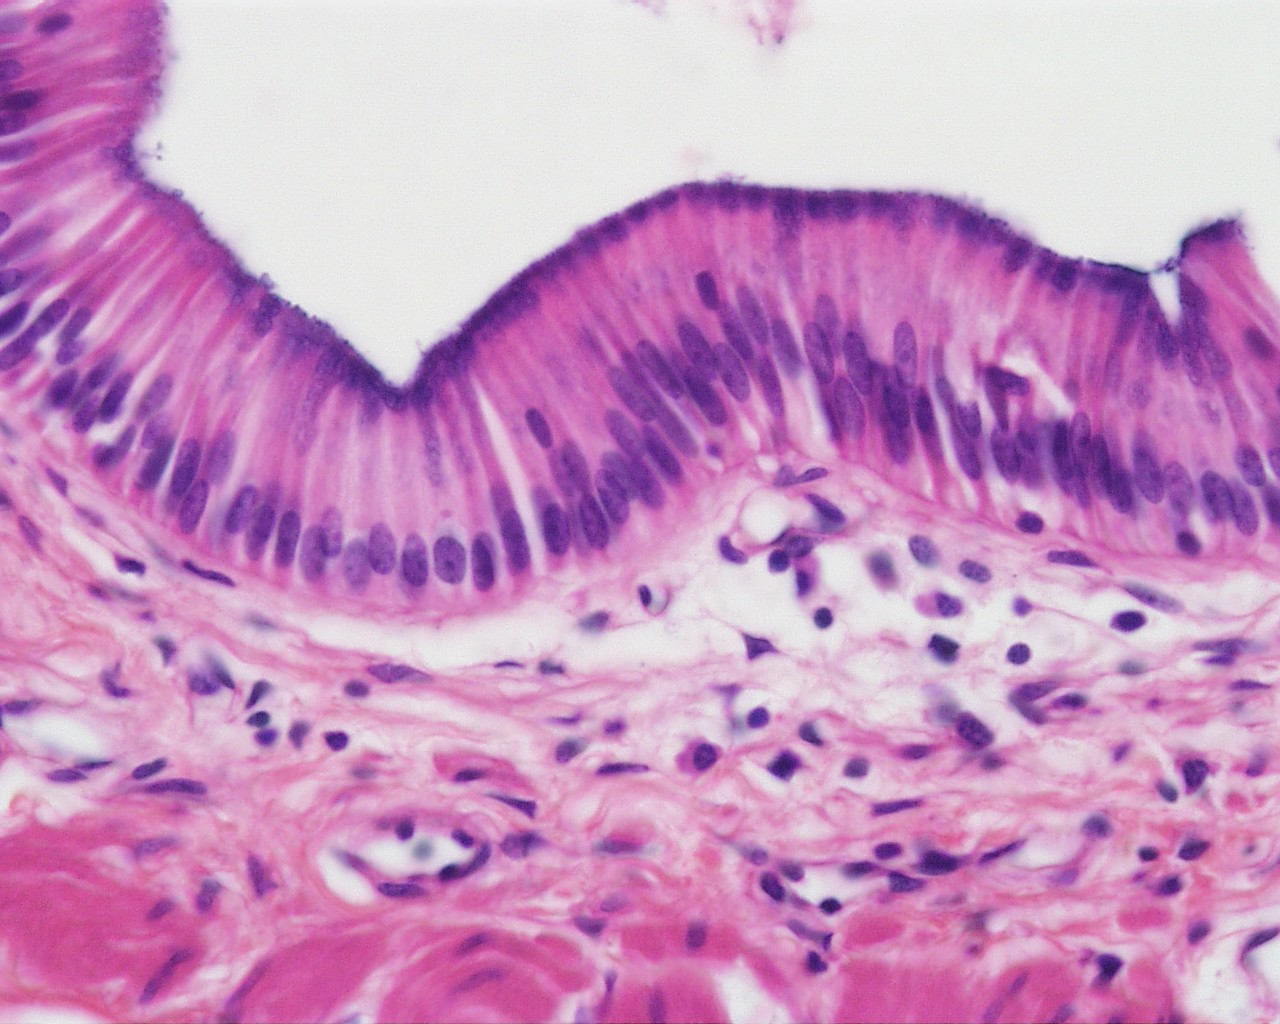 Anatomy and Physiology I Coursework: Epithelial Tissues